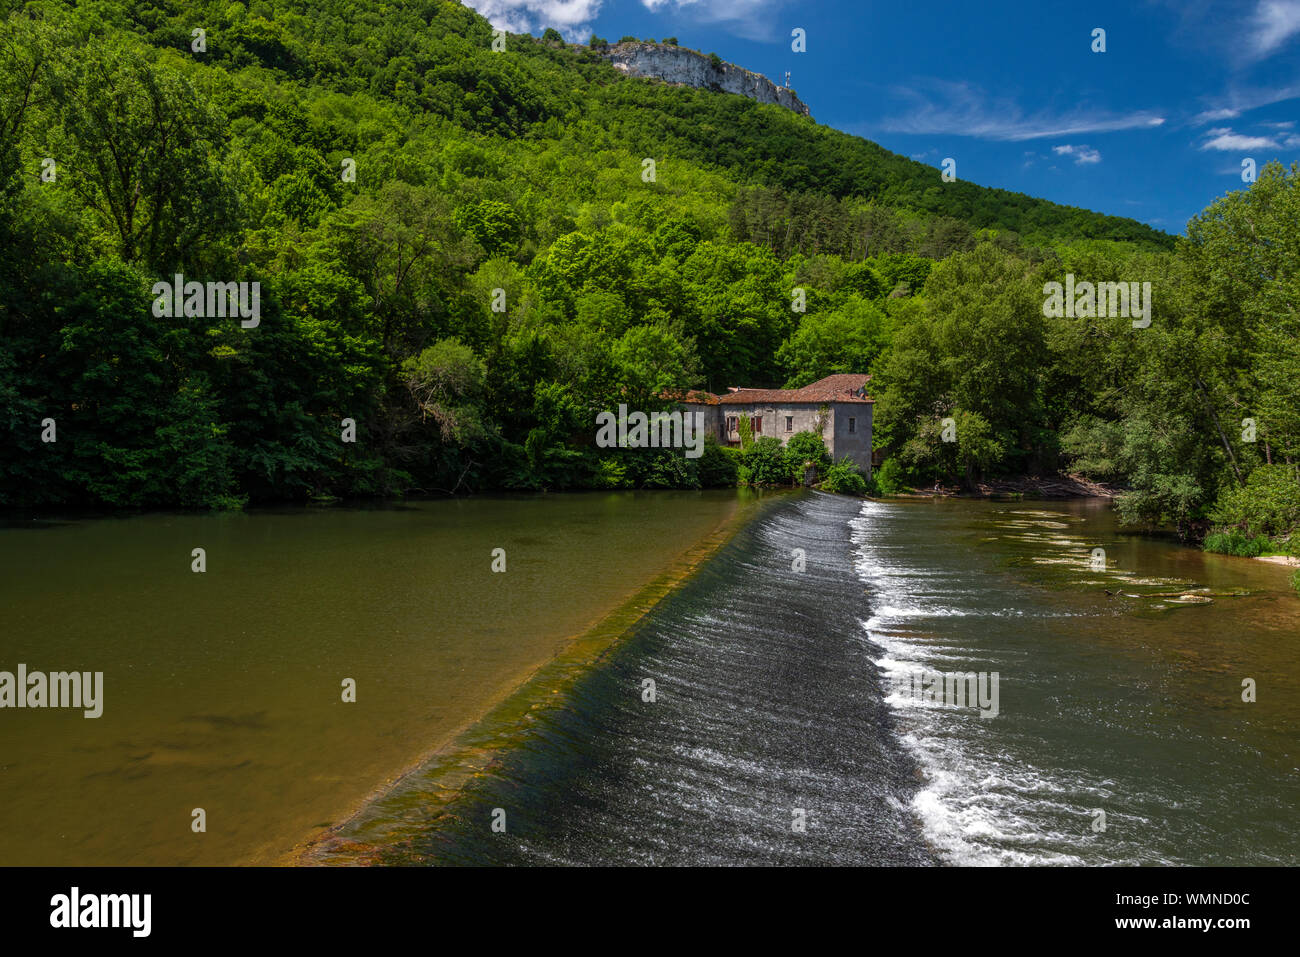 The Aveyron River in the south of France, showing the lush foliage of August. Stock Photo